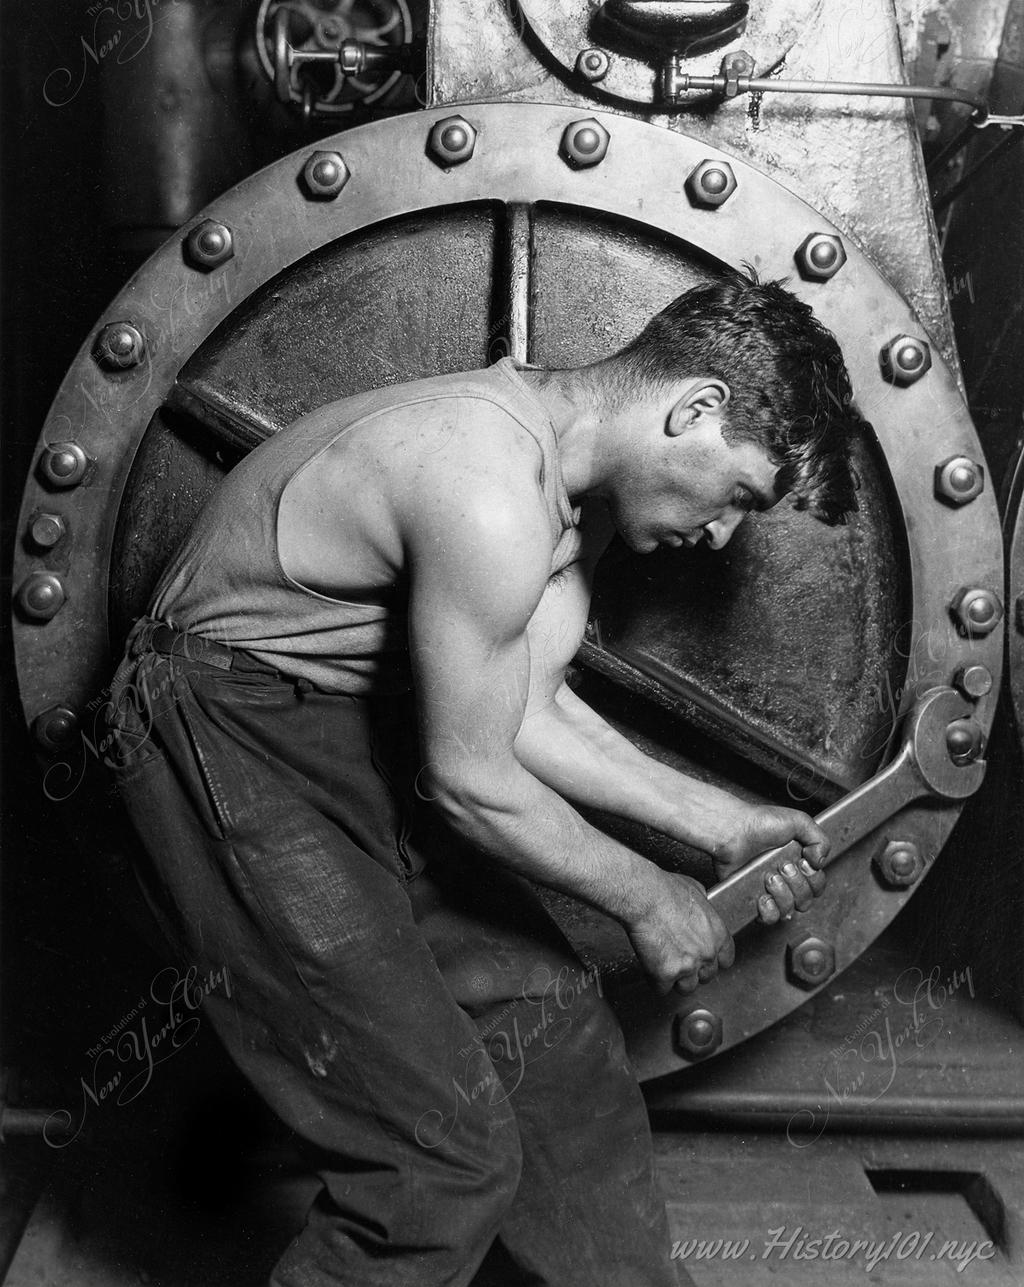 Explore Lewis Hine's 1921 photograph "Mechanic and Steam Pump", an iconic portrayal of the enduring bond between workers and machines in industrial America